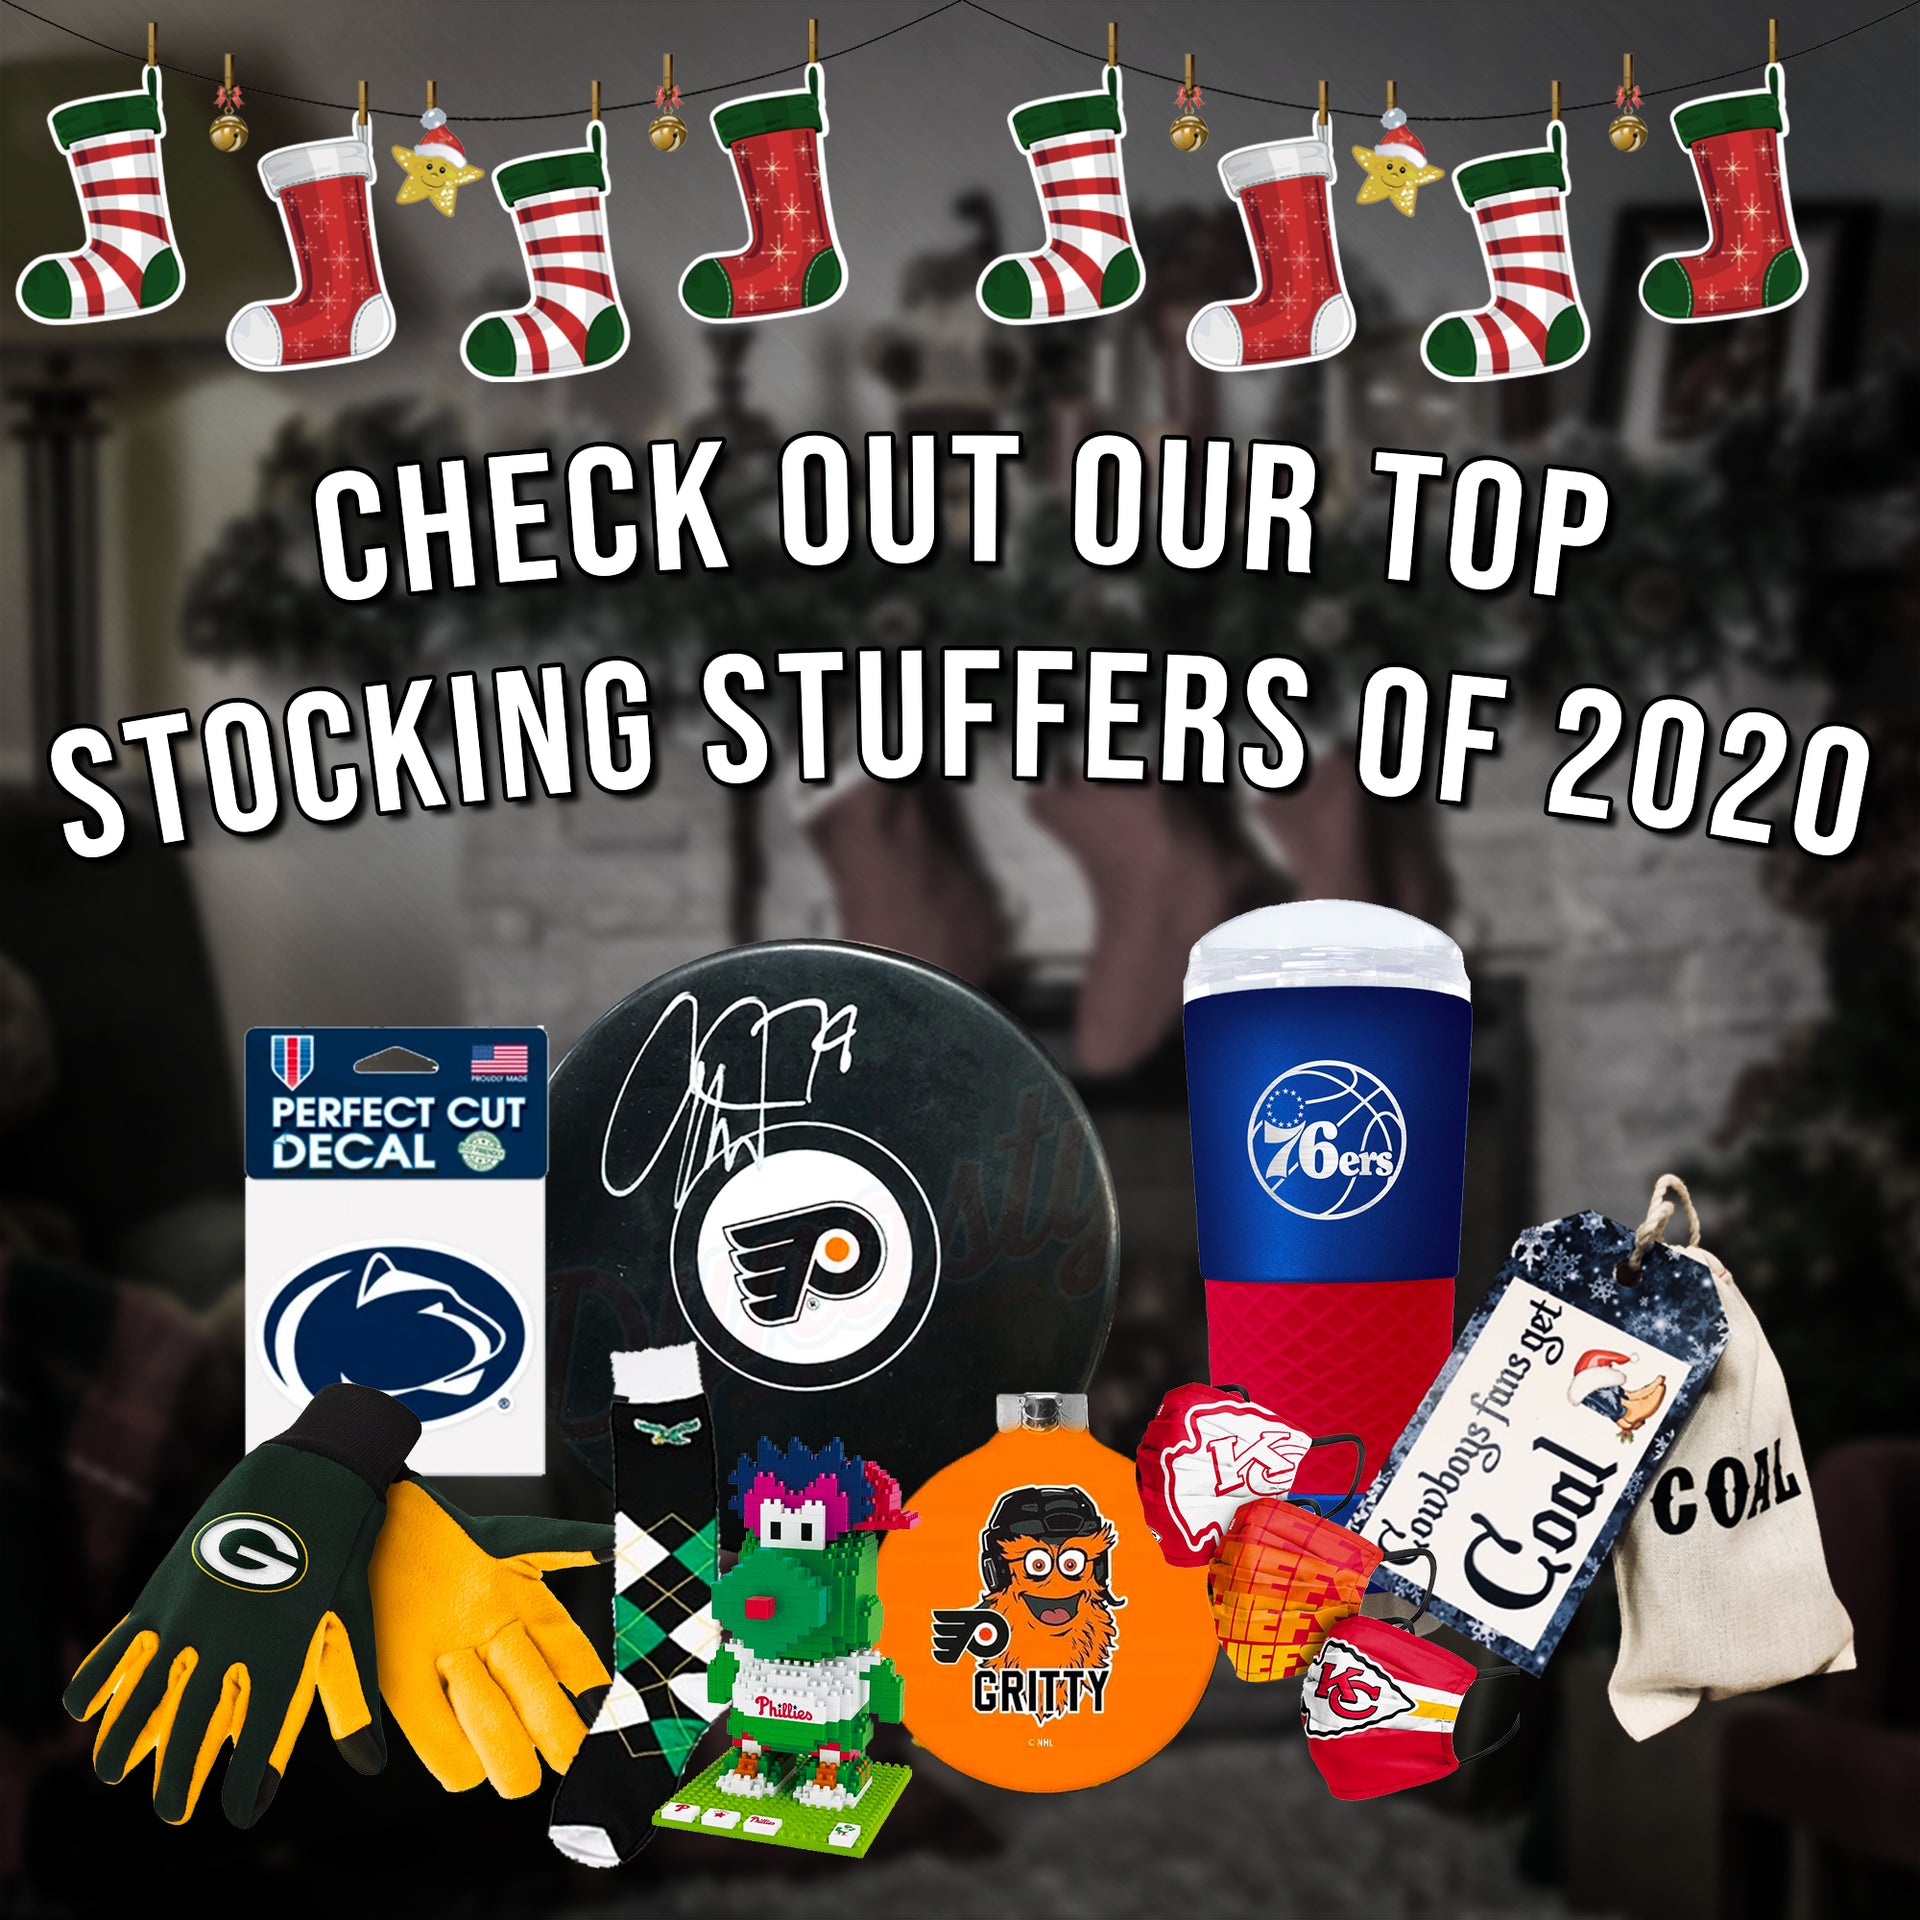 Check out all these cool stocking stuffers for teenage boys. They